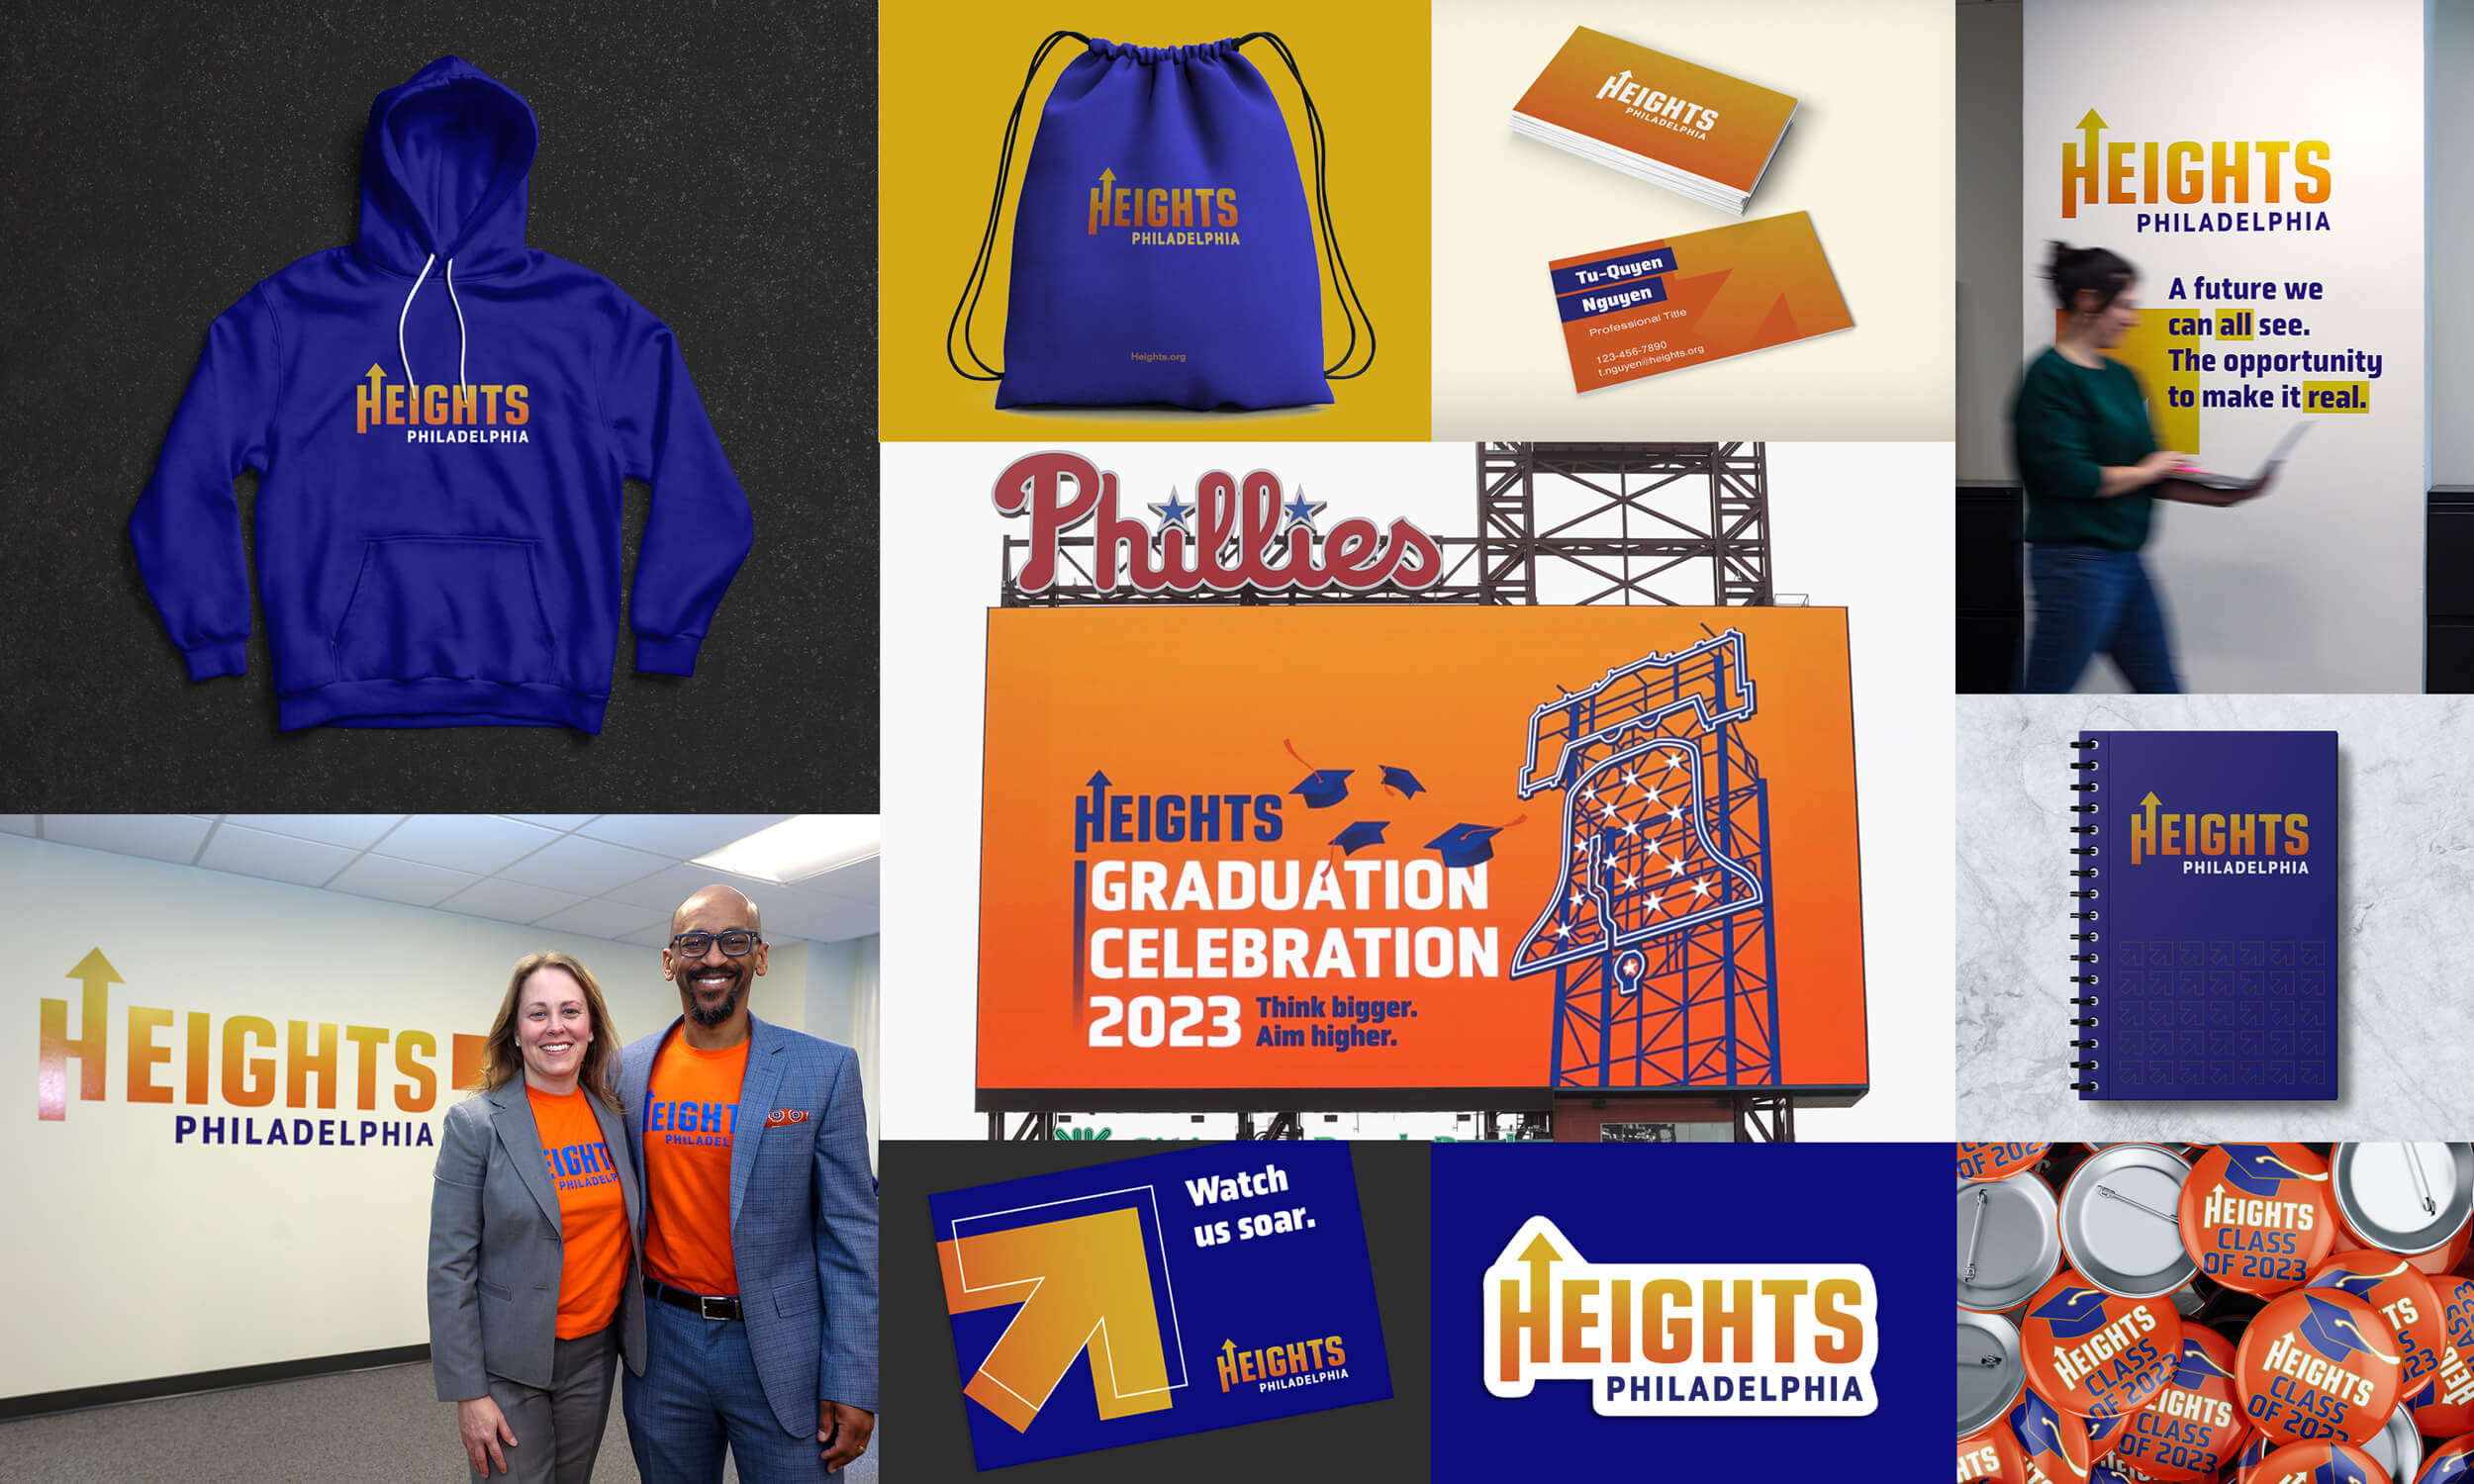 Heights Philadelphia brand swag and event materials